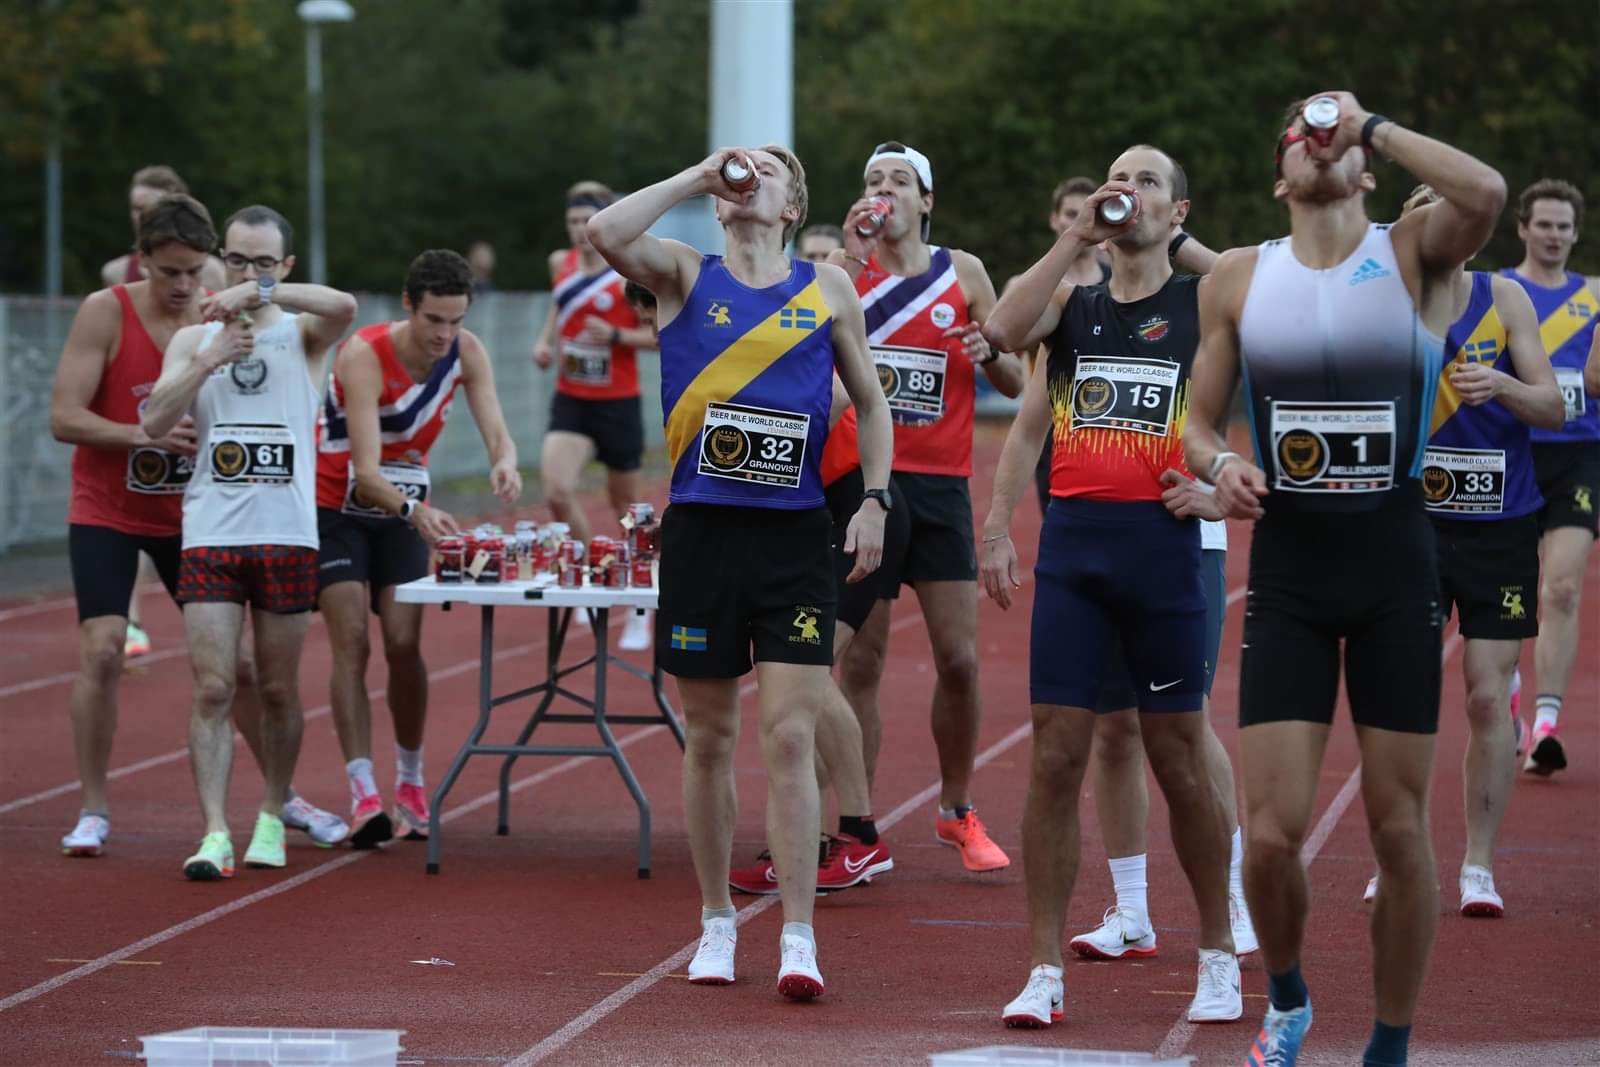 Chug Zone for the Men's Championship Race at the 2022 Beer Mile World Classic